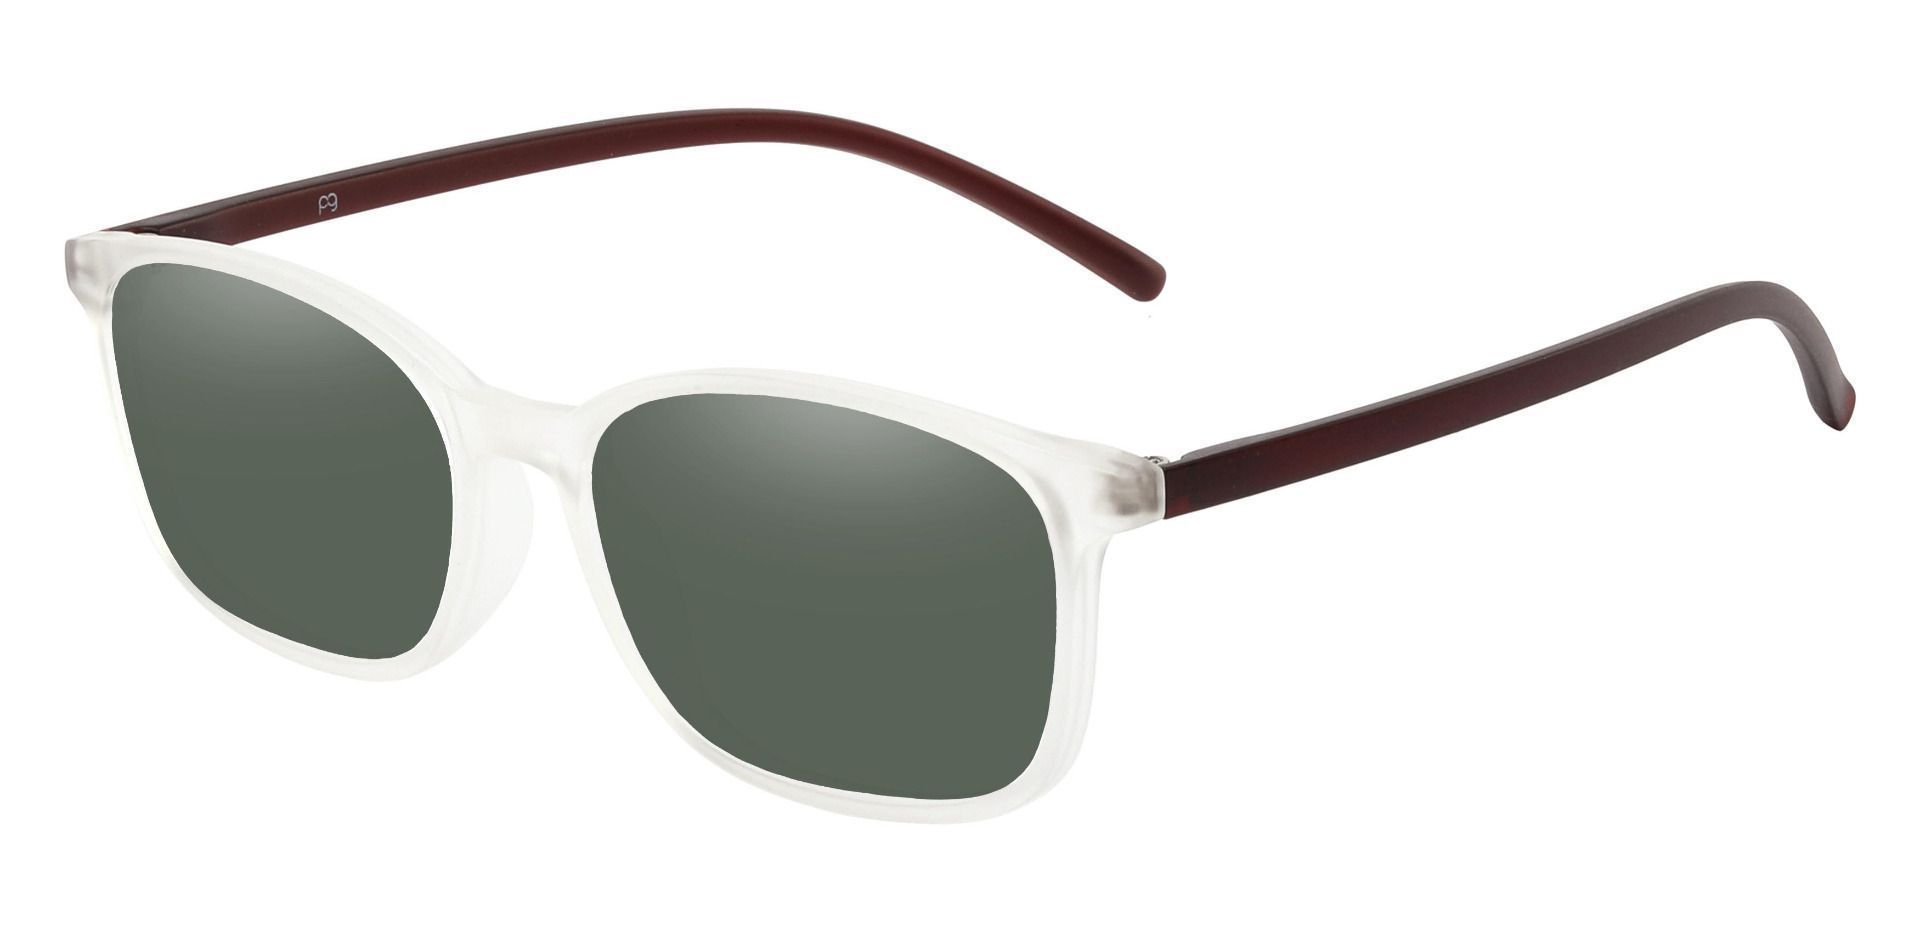 Onyx Square Prescription Sunglasses - Clear Frame With Green Lenses